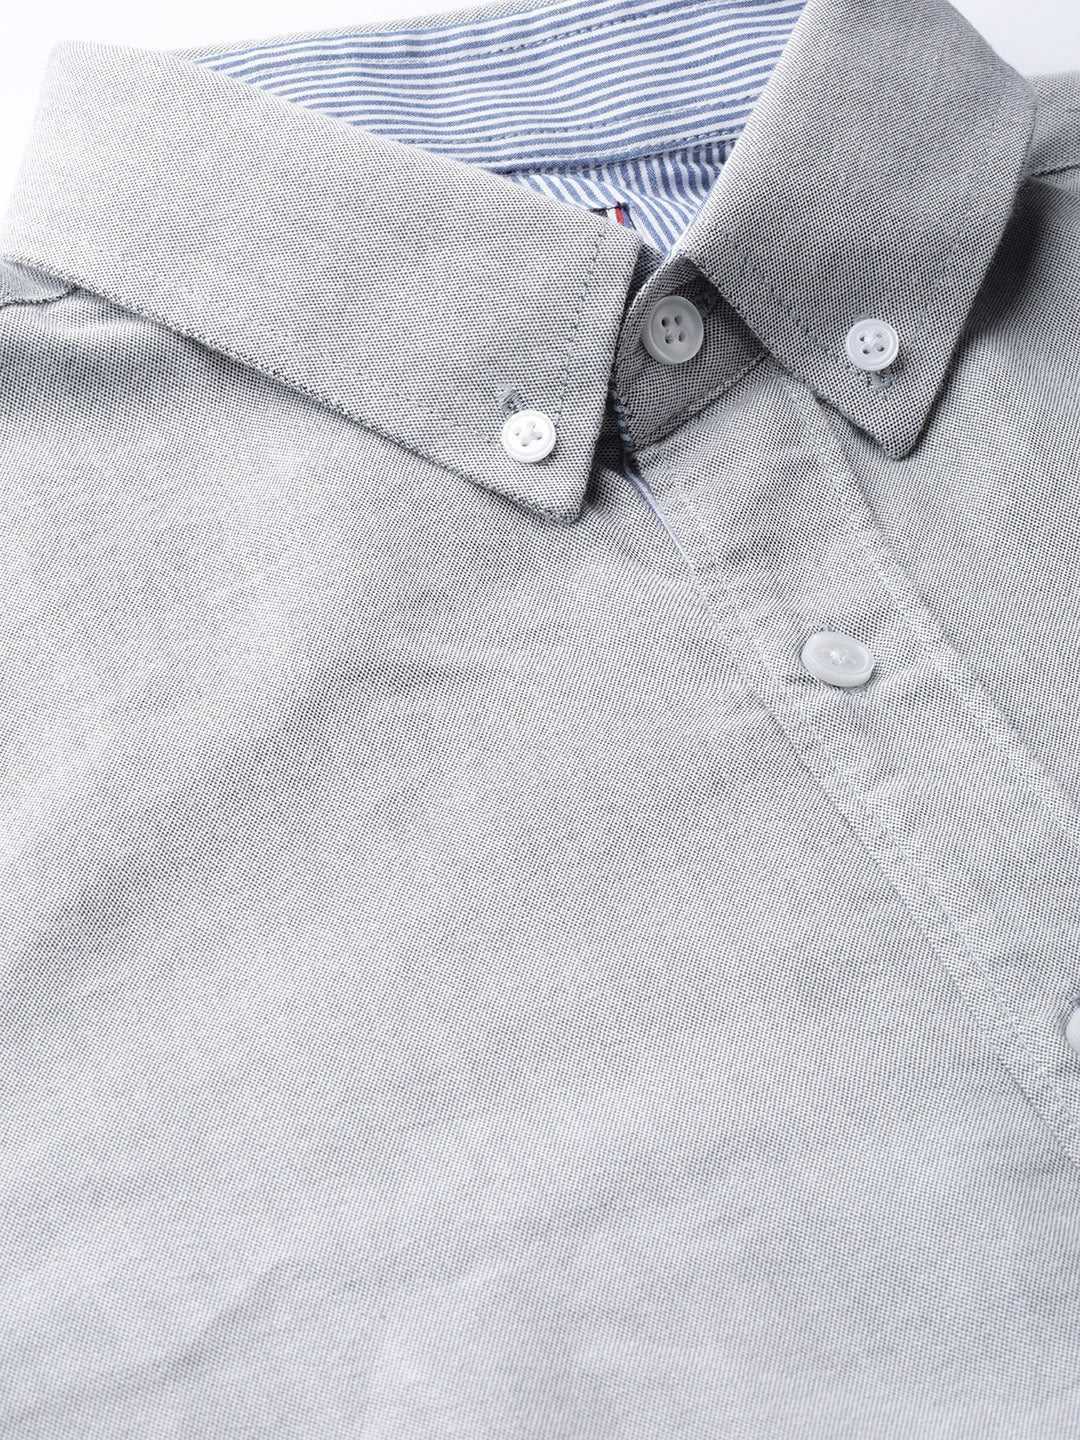 Regular Fit Oxford Weave Solid Casual Shirt